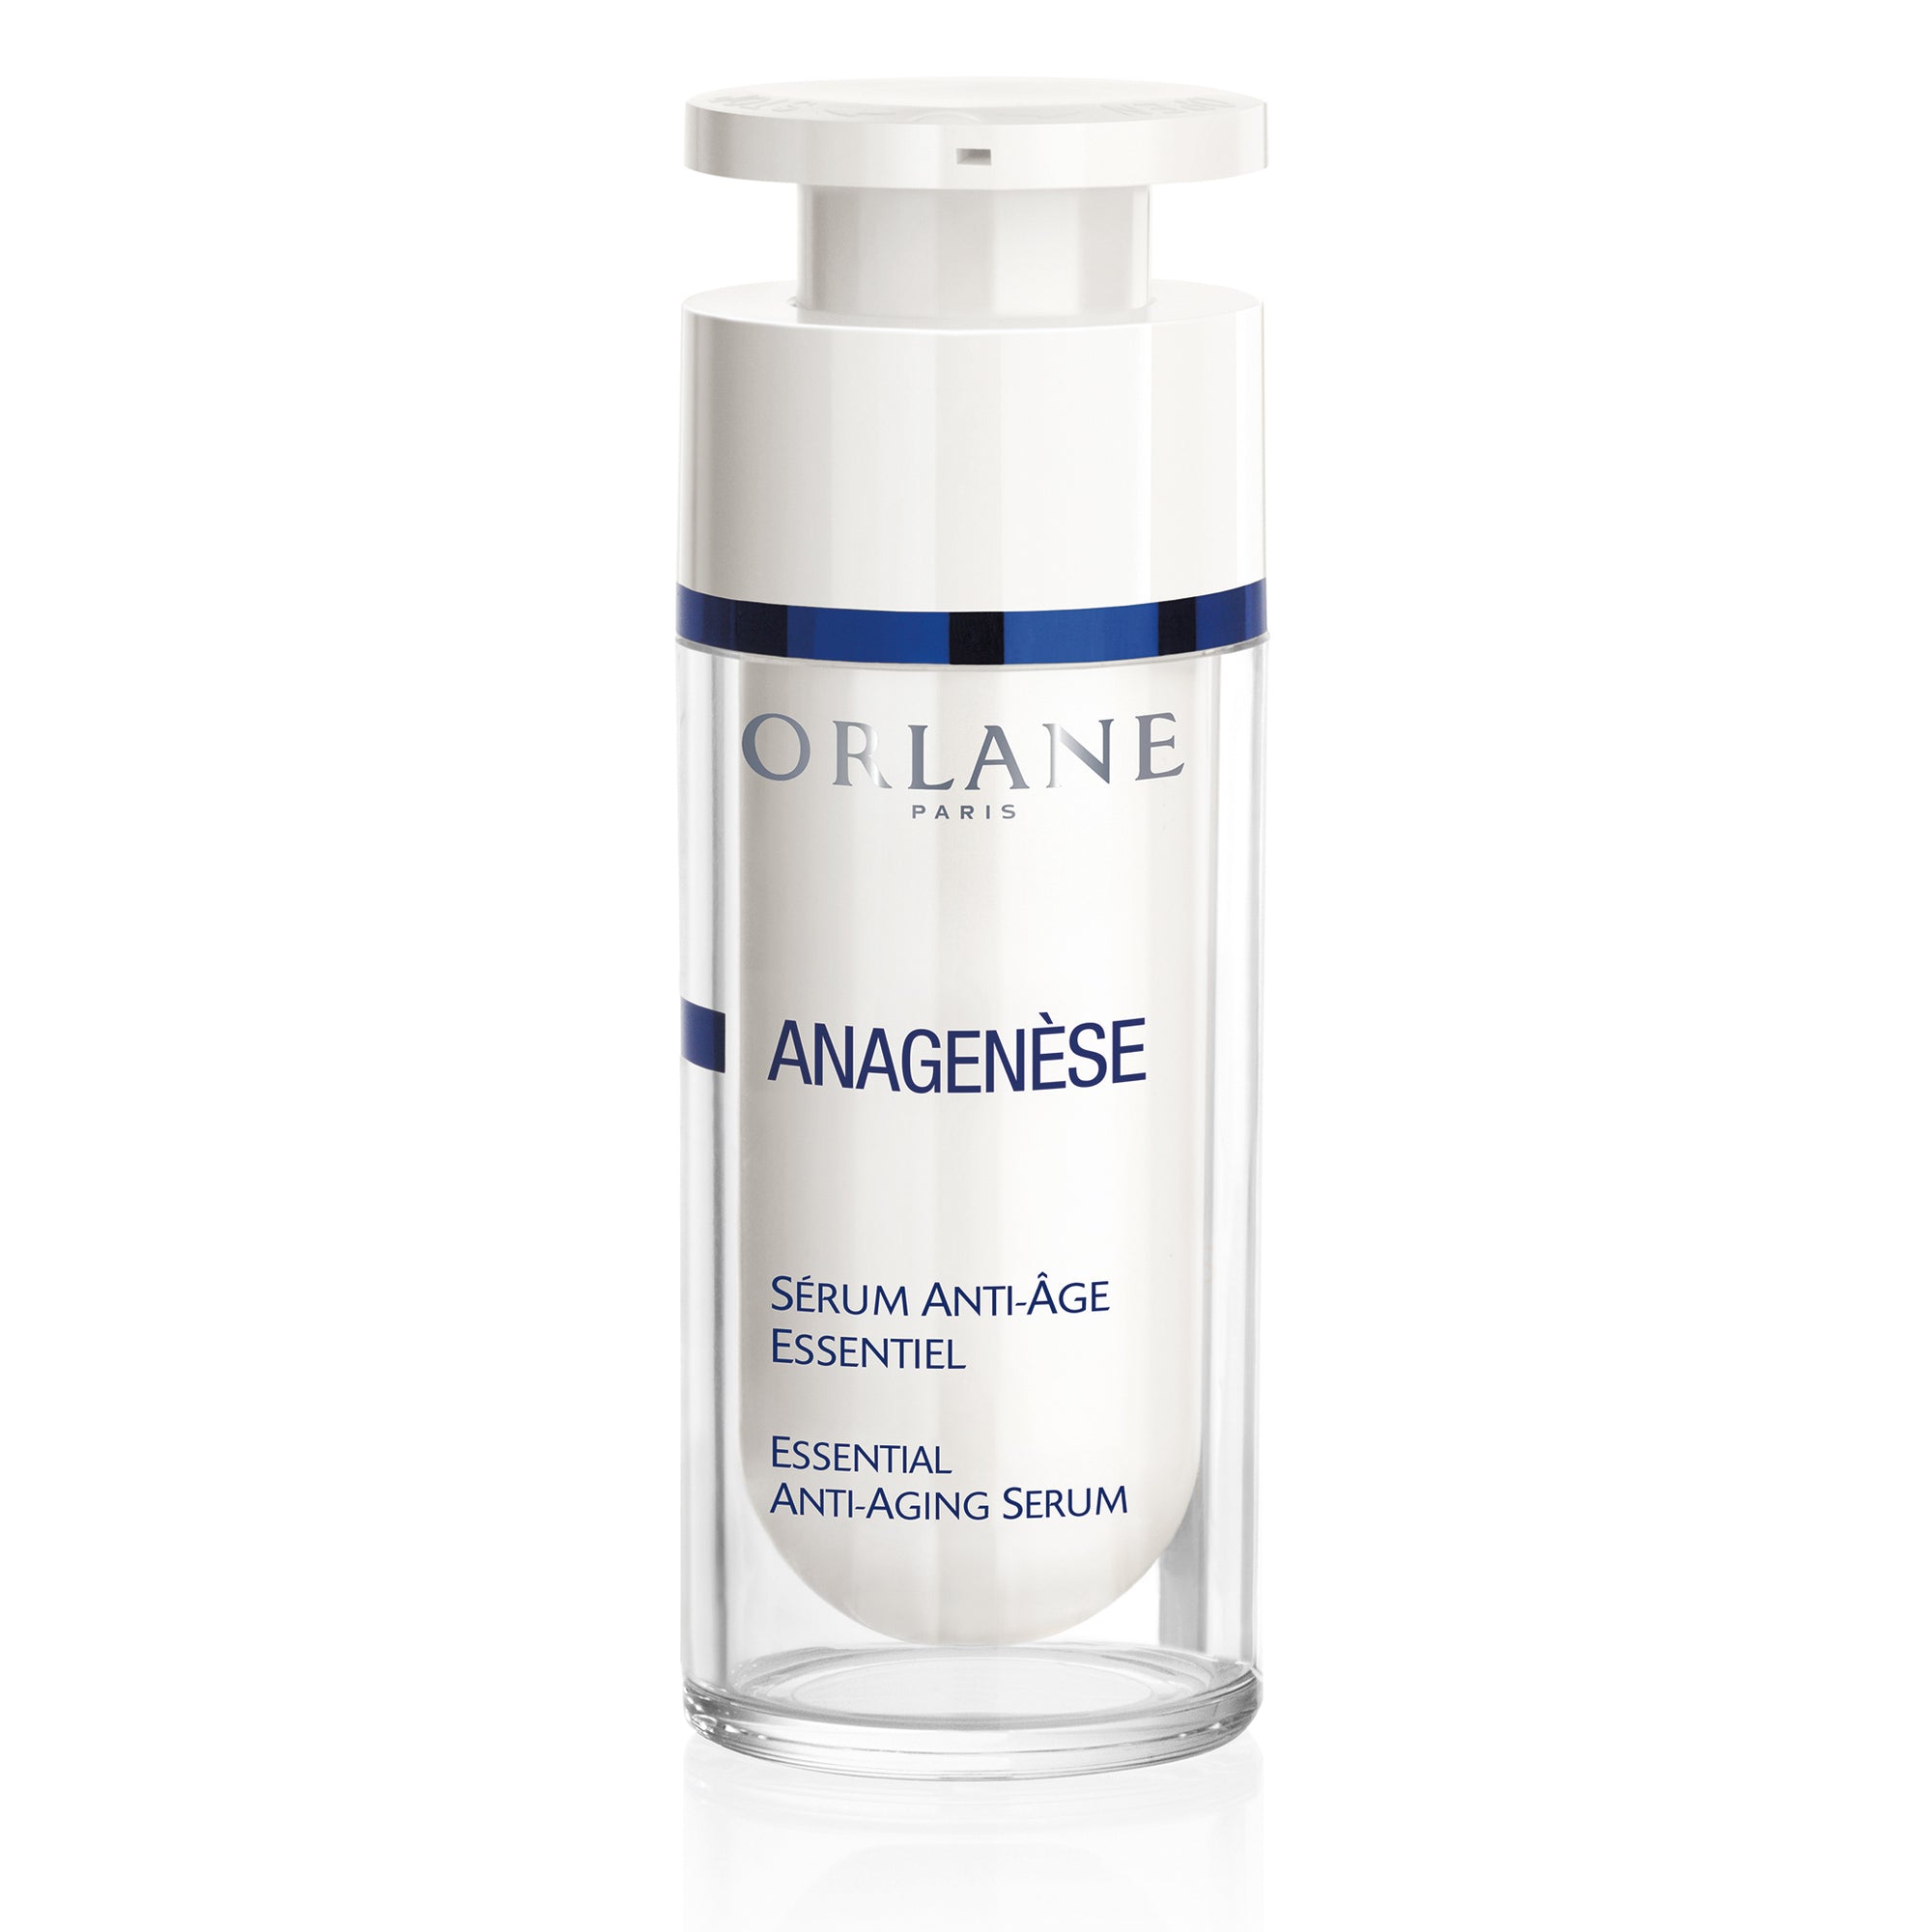 ORLANE - Anagenese • Prolong Youthful Skin Even Before Wrinkles Appear